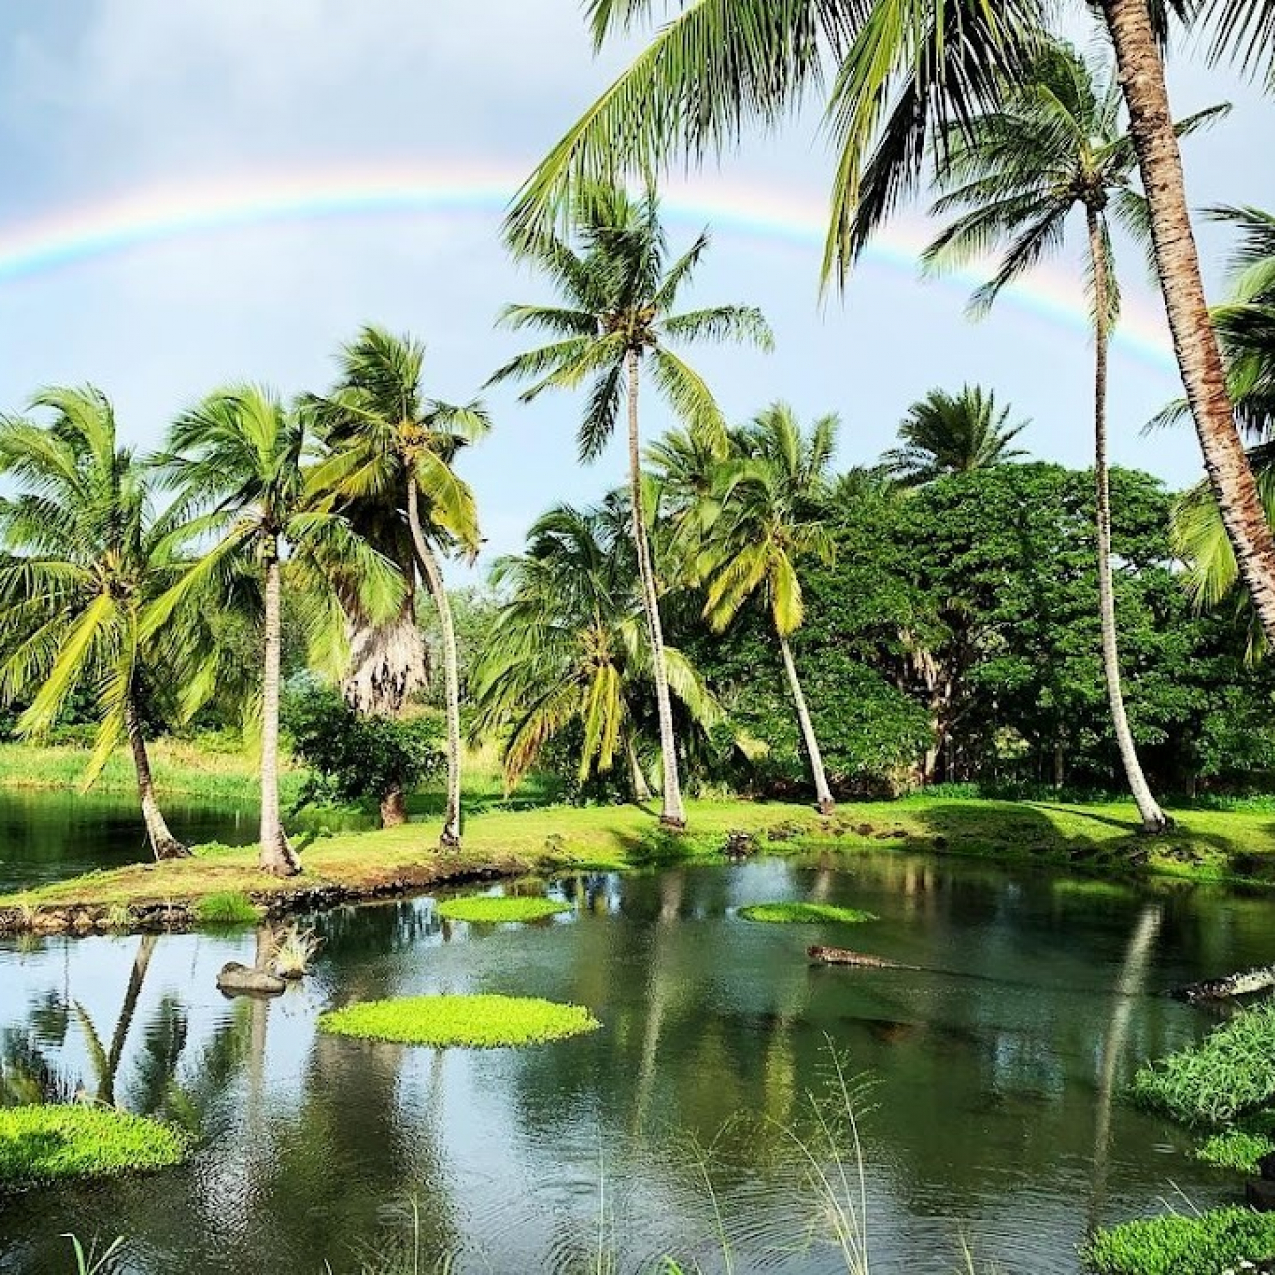 A Hawaiian fishpond surrounded by palm trees and a rainbow in the background.